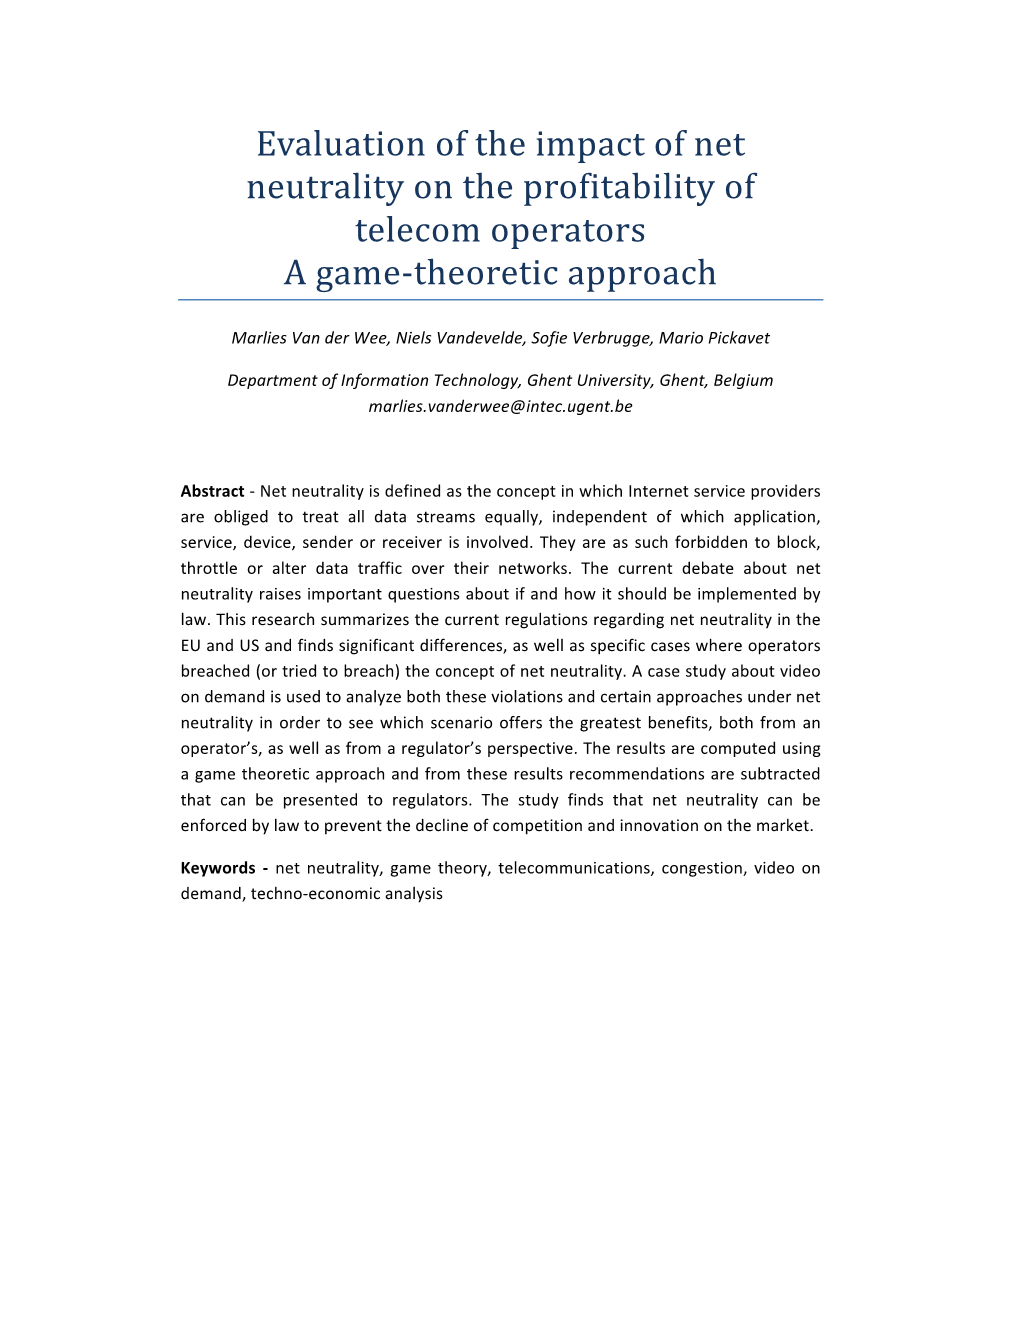 Evaluation of the Impact of Net Neutrality on the Profitability of Telecom Operators a Game-Theoretic Approach